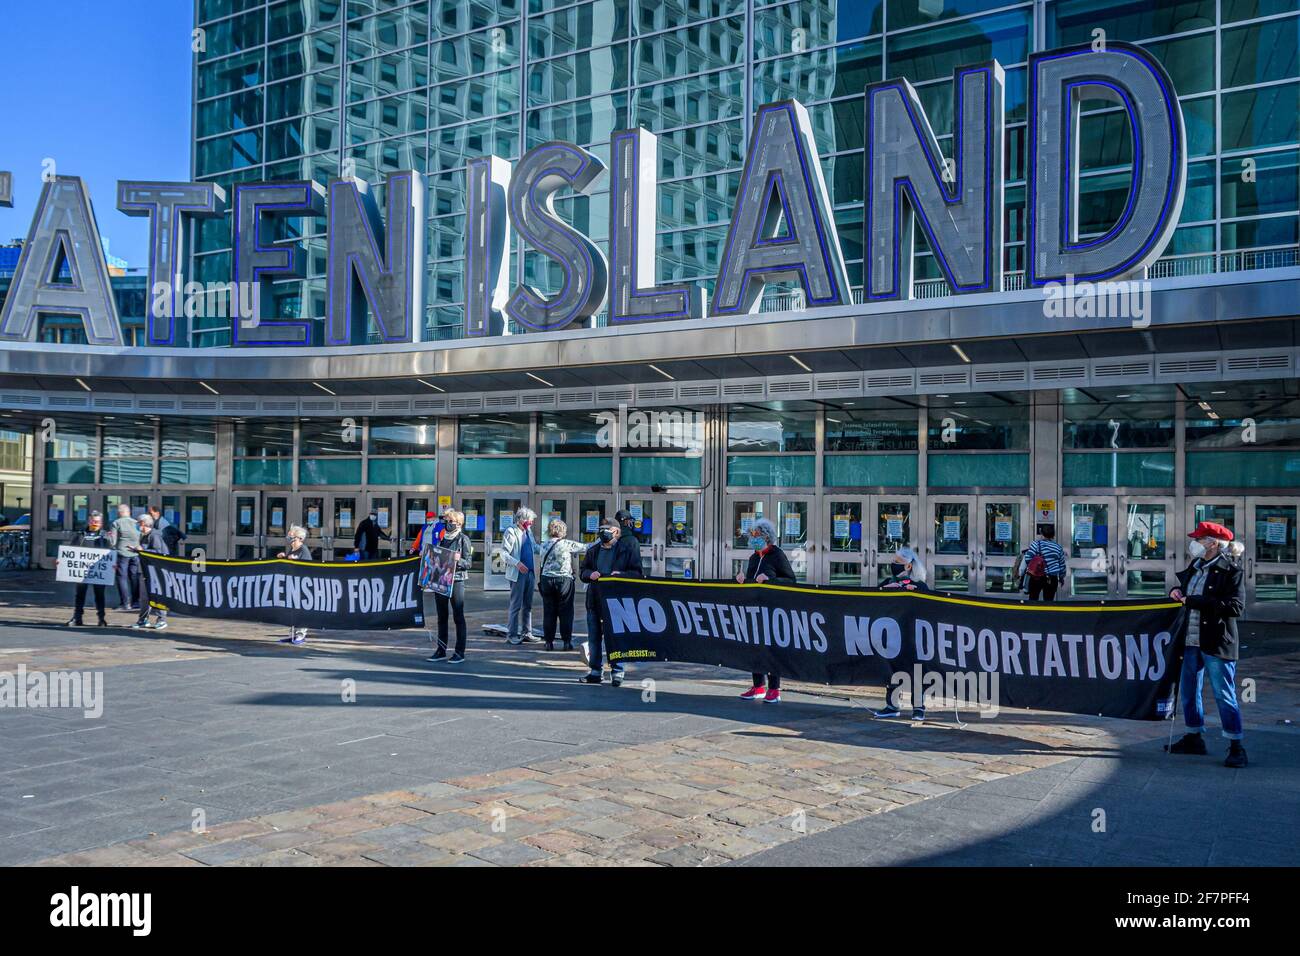 Members of the activist group Rise and Resist gathered at the plaza outside the Staten Island Ferry in Manhattan on April 8, 2021 to continue their weekly Immigration Vigils demanding that the Biden administration permanently stop detaining and deporting immigrants, to dismantle CBP (Customs and Border Patrol) and ICE (Immigration and Customs Enforcement), and to create a path to citizenship for all. (Photo by Erik McGregor/Sipa USA) Stock Photo